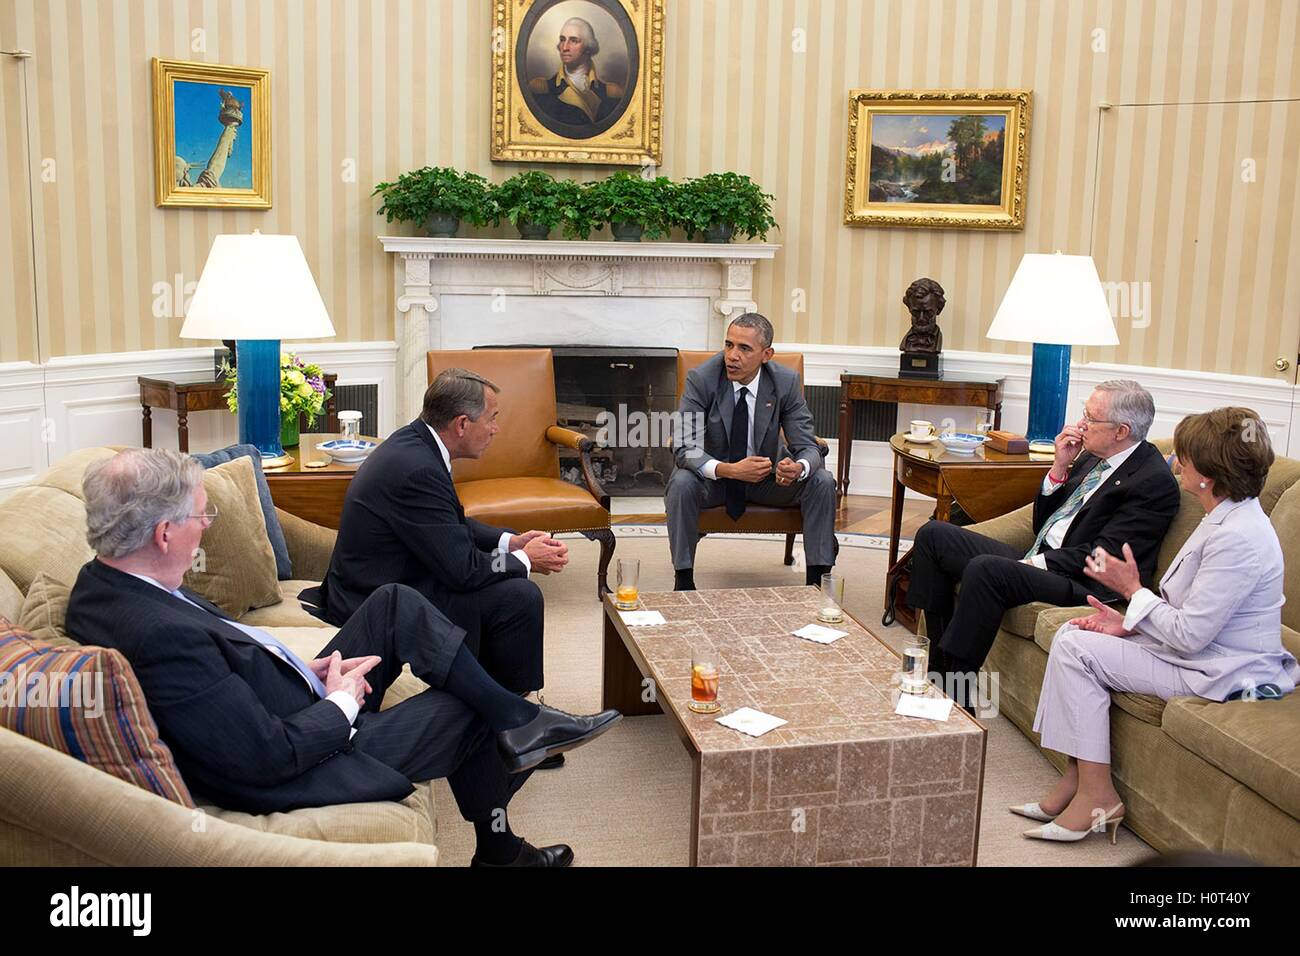 U.S. President Barack Obama meets with Congressional leaders in the Oval Office to discuss foreign policy issues June 18, 2014 in Washington, DC. Stock Photo